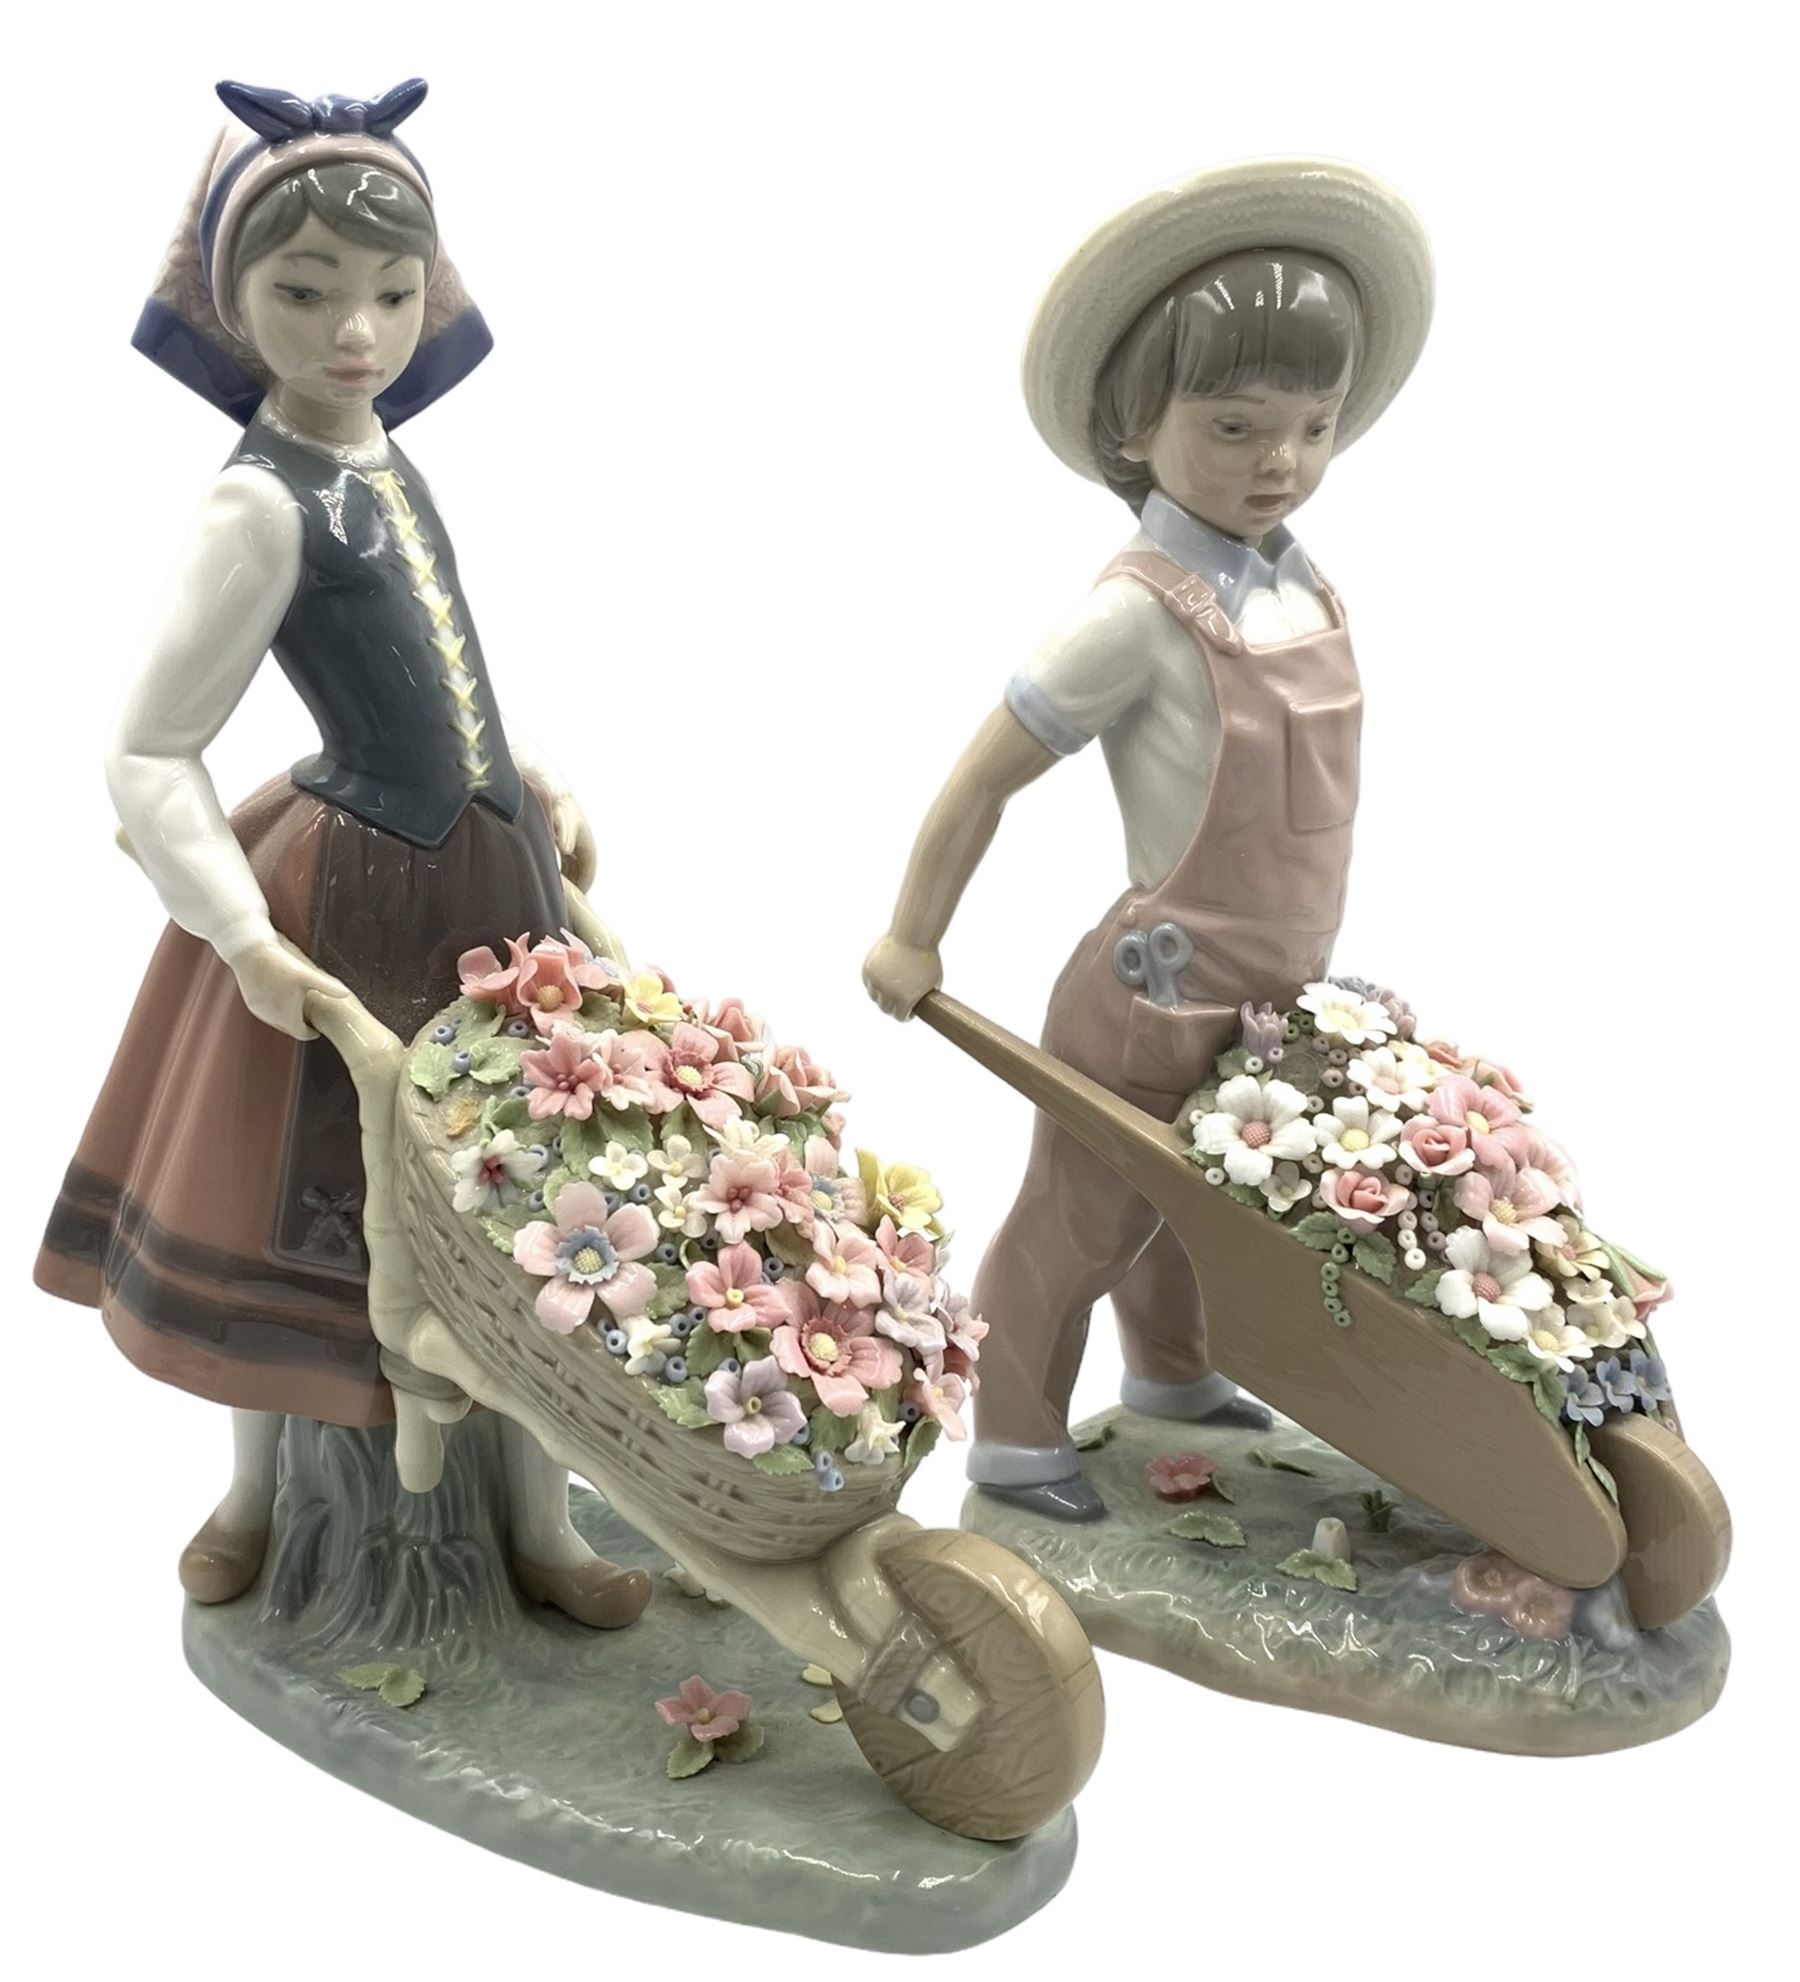 Lladro figure 'A barrel of Blossoms' No.1419 and another 'Little Gardener' No.1283 (2)